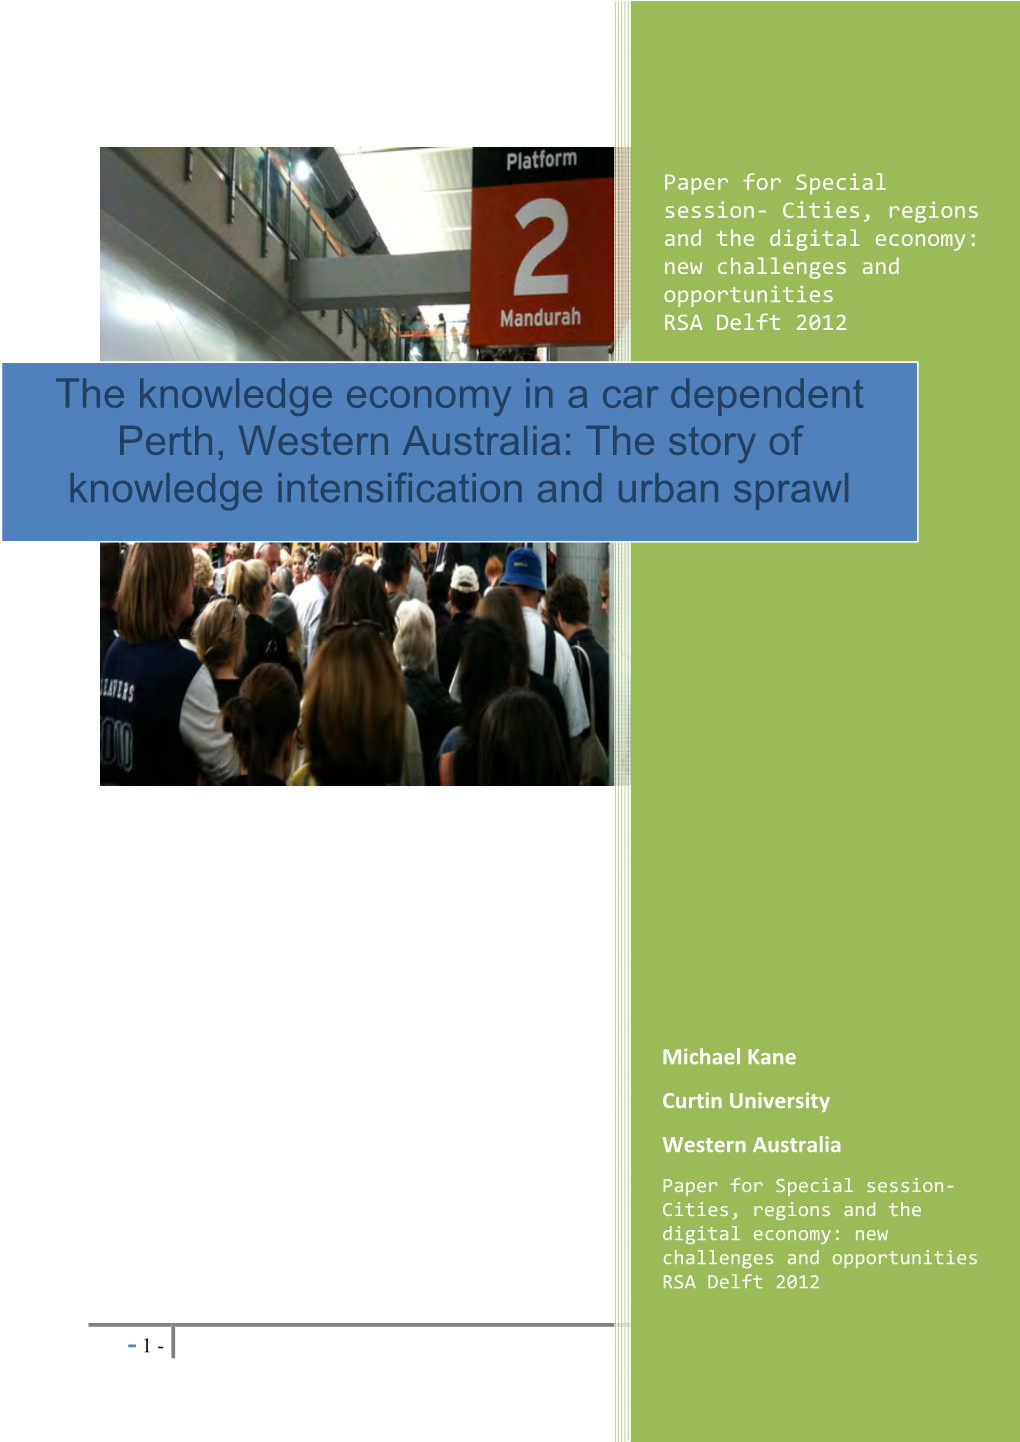 The Knowledge Economy in a Car Dependent Perth, Western Australia: the Story of Knowledge Intensification and Urban Sprawl